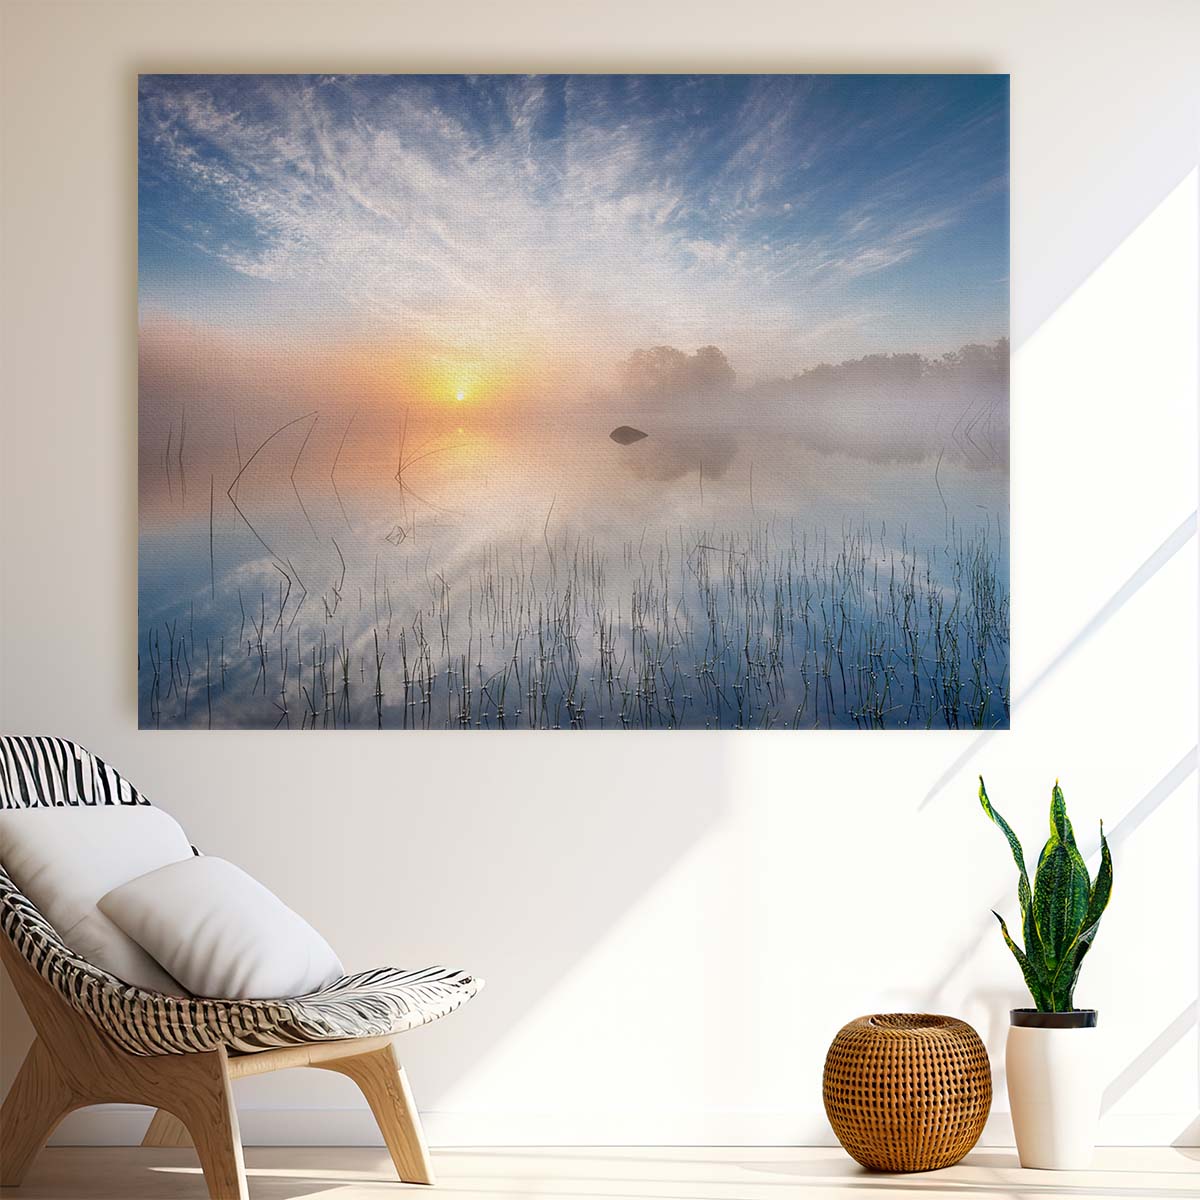 Misty Sunrise Lake Reflection Landscape Wall Art by Luxuriance Designs. Made in USA.